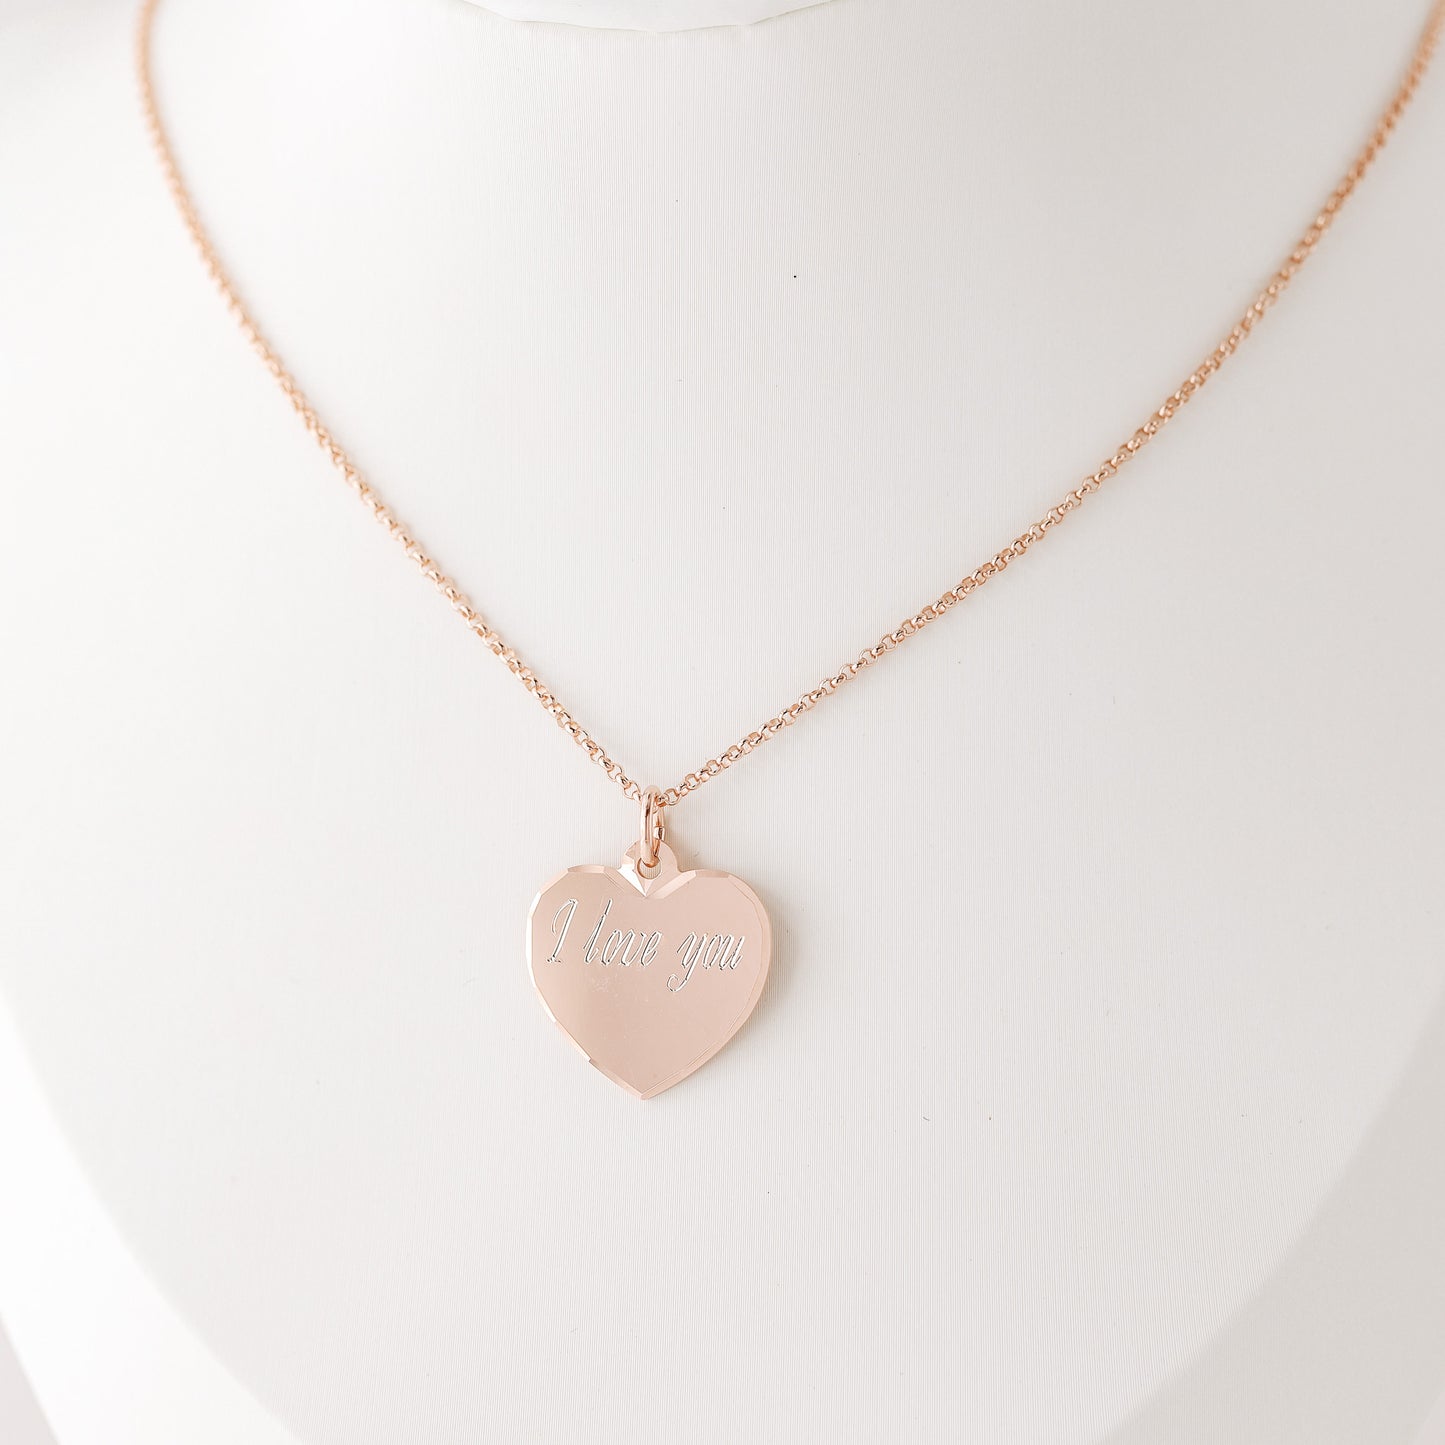 Gold Heart Necklace, Heart Name Necklace, Love Necklace, Minimalist Heart Necklace, Mothers Day Gift, Lover Gift BYSDMJEWELS